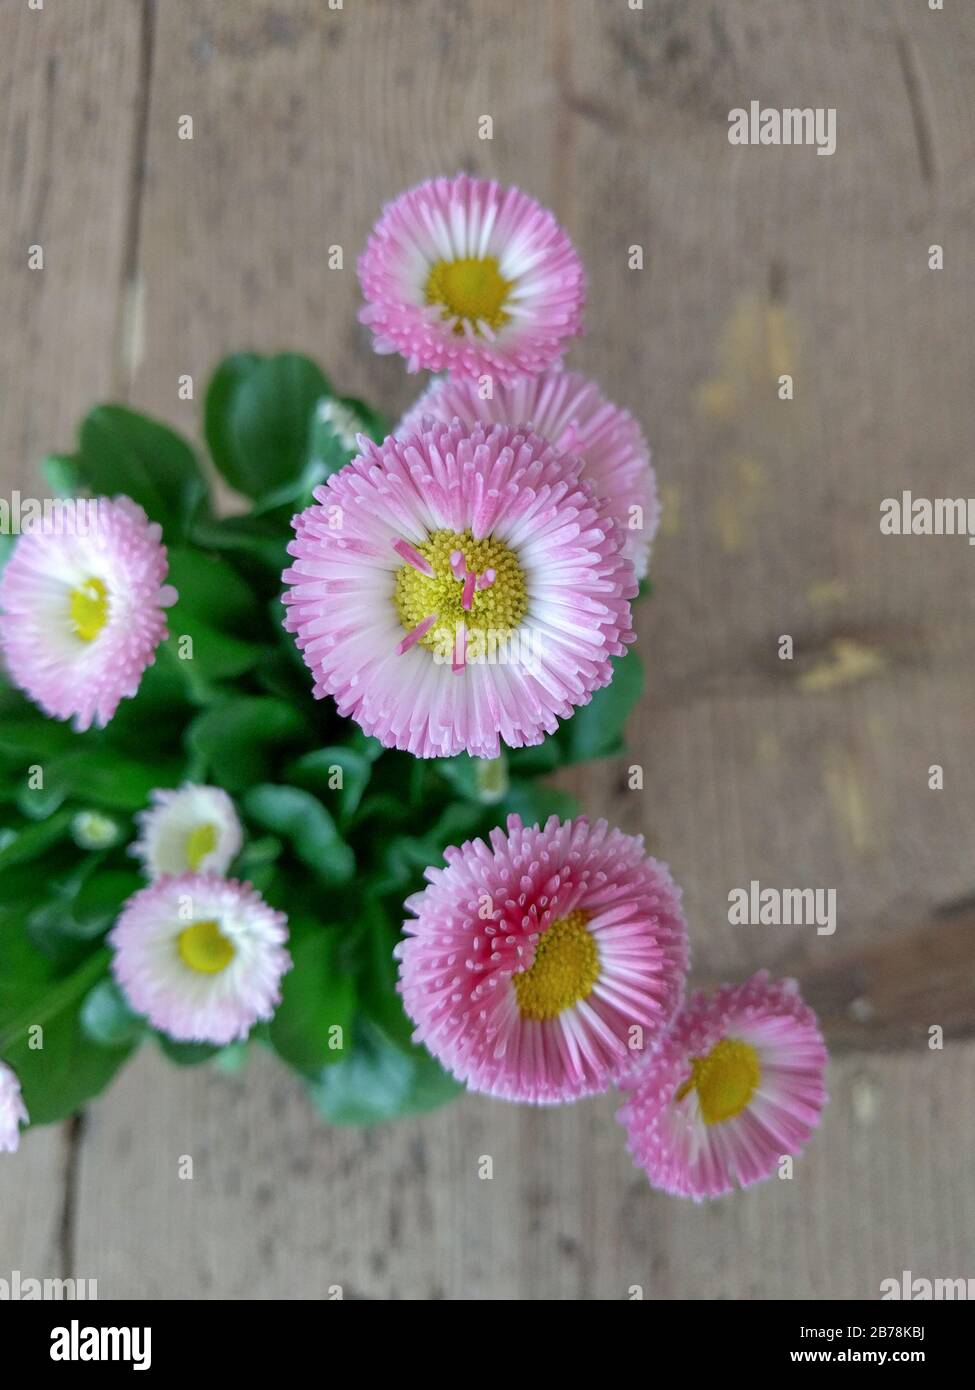 Daisy pomponette plant with pink flower head Stock Photo